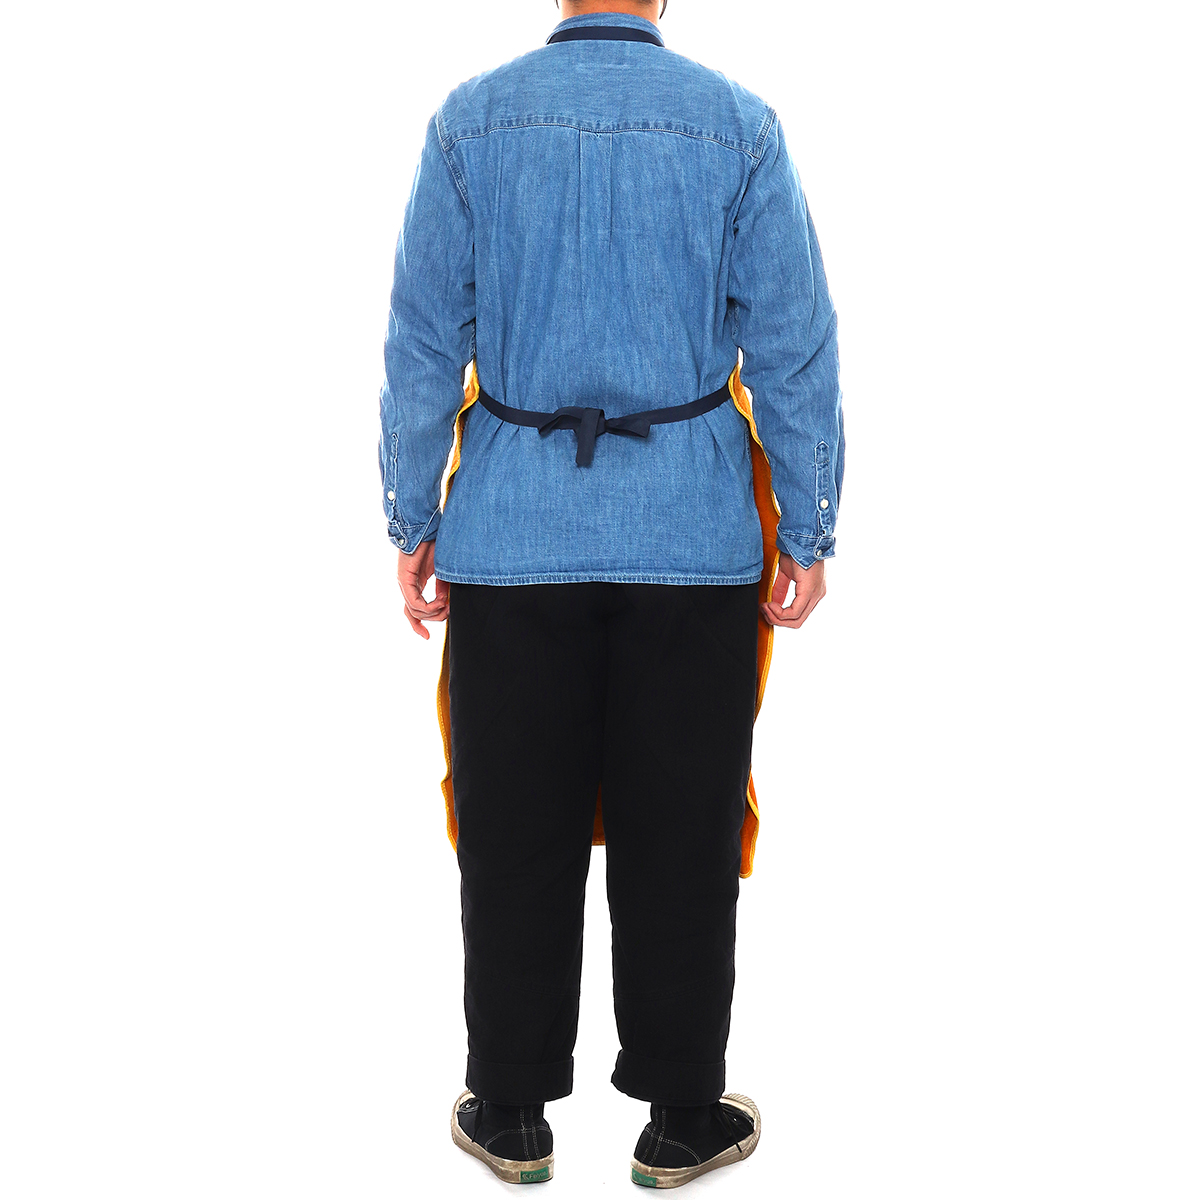 Cowhide-Leather-Welding-Apron-Welder-Protection-Clothe-Mechanic-Protector-Gear-1642713-8